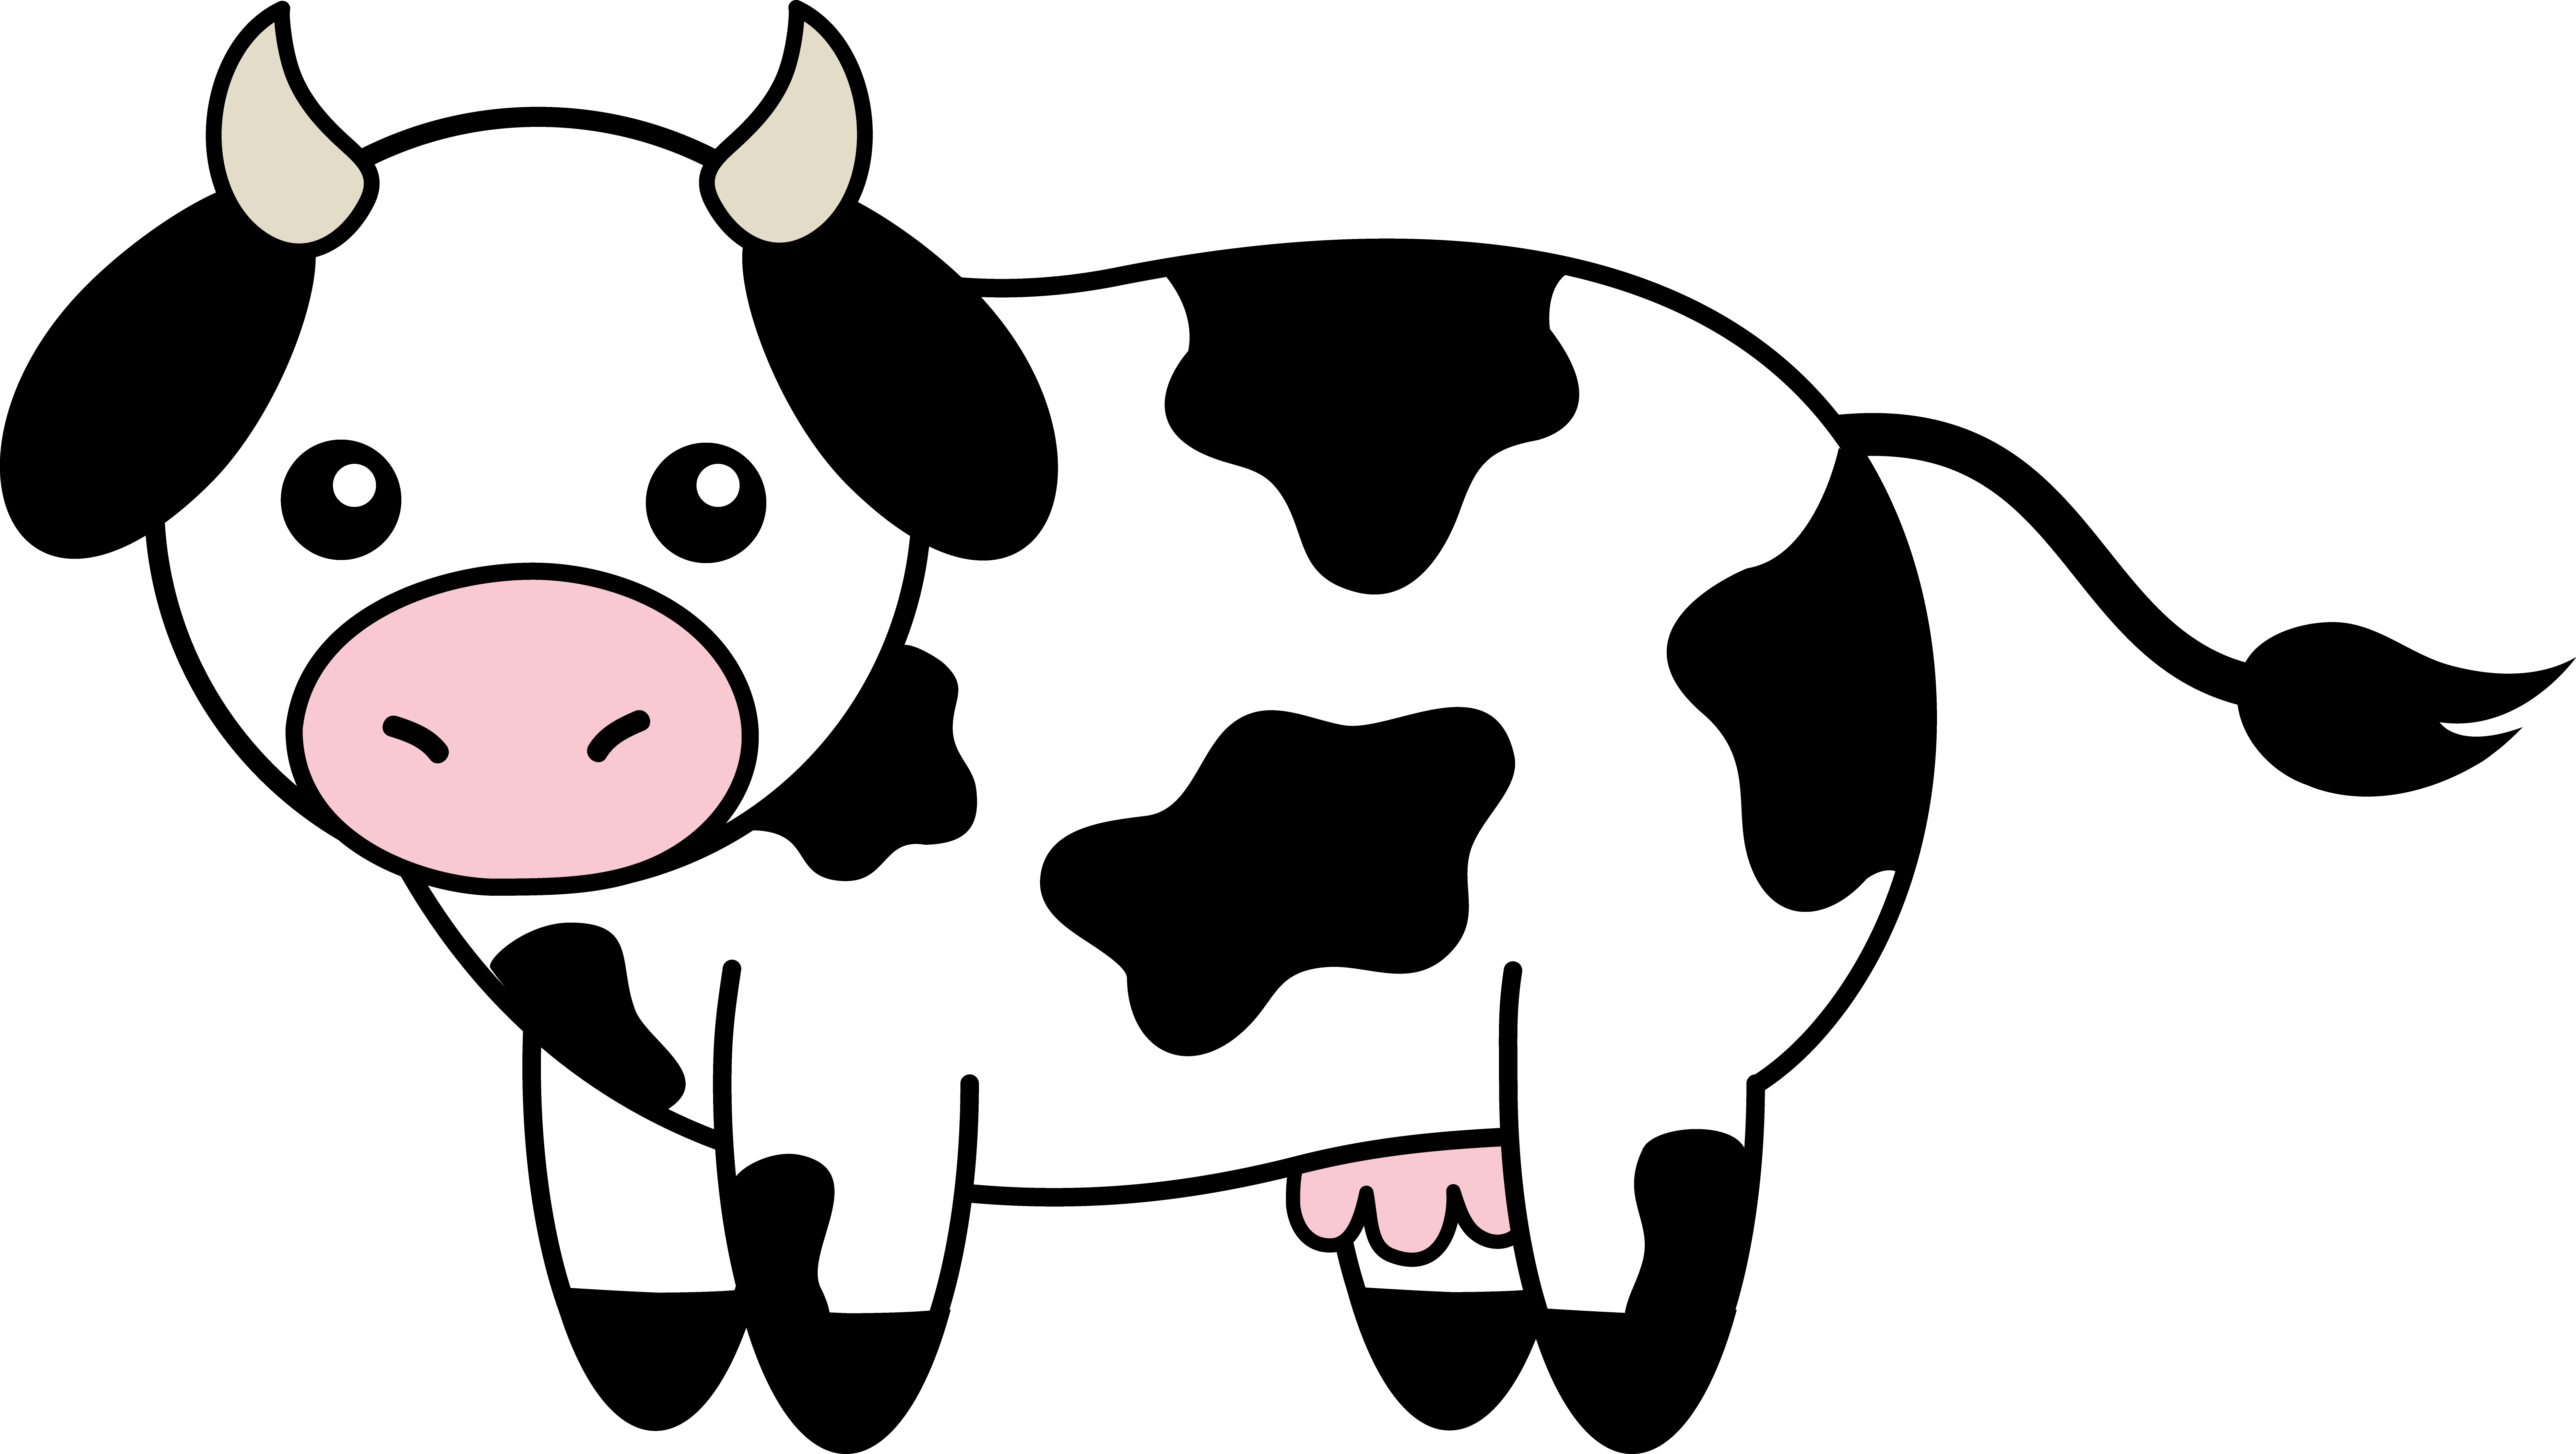 Cow Draw - ClipArt Best